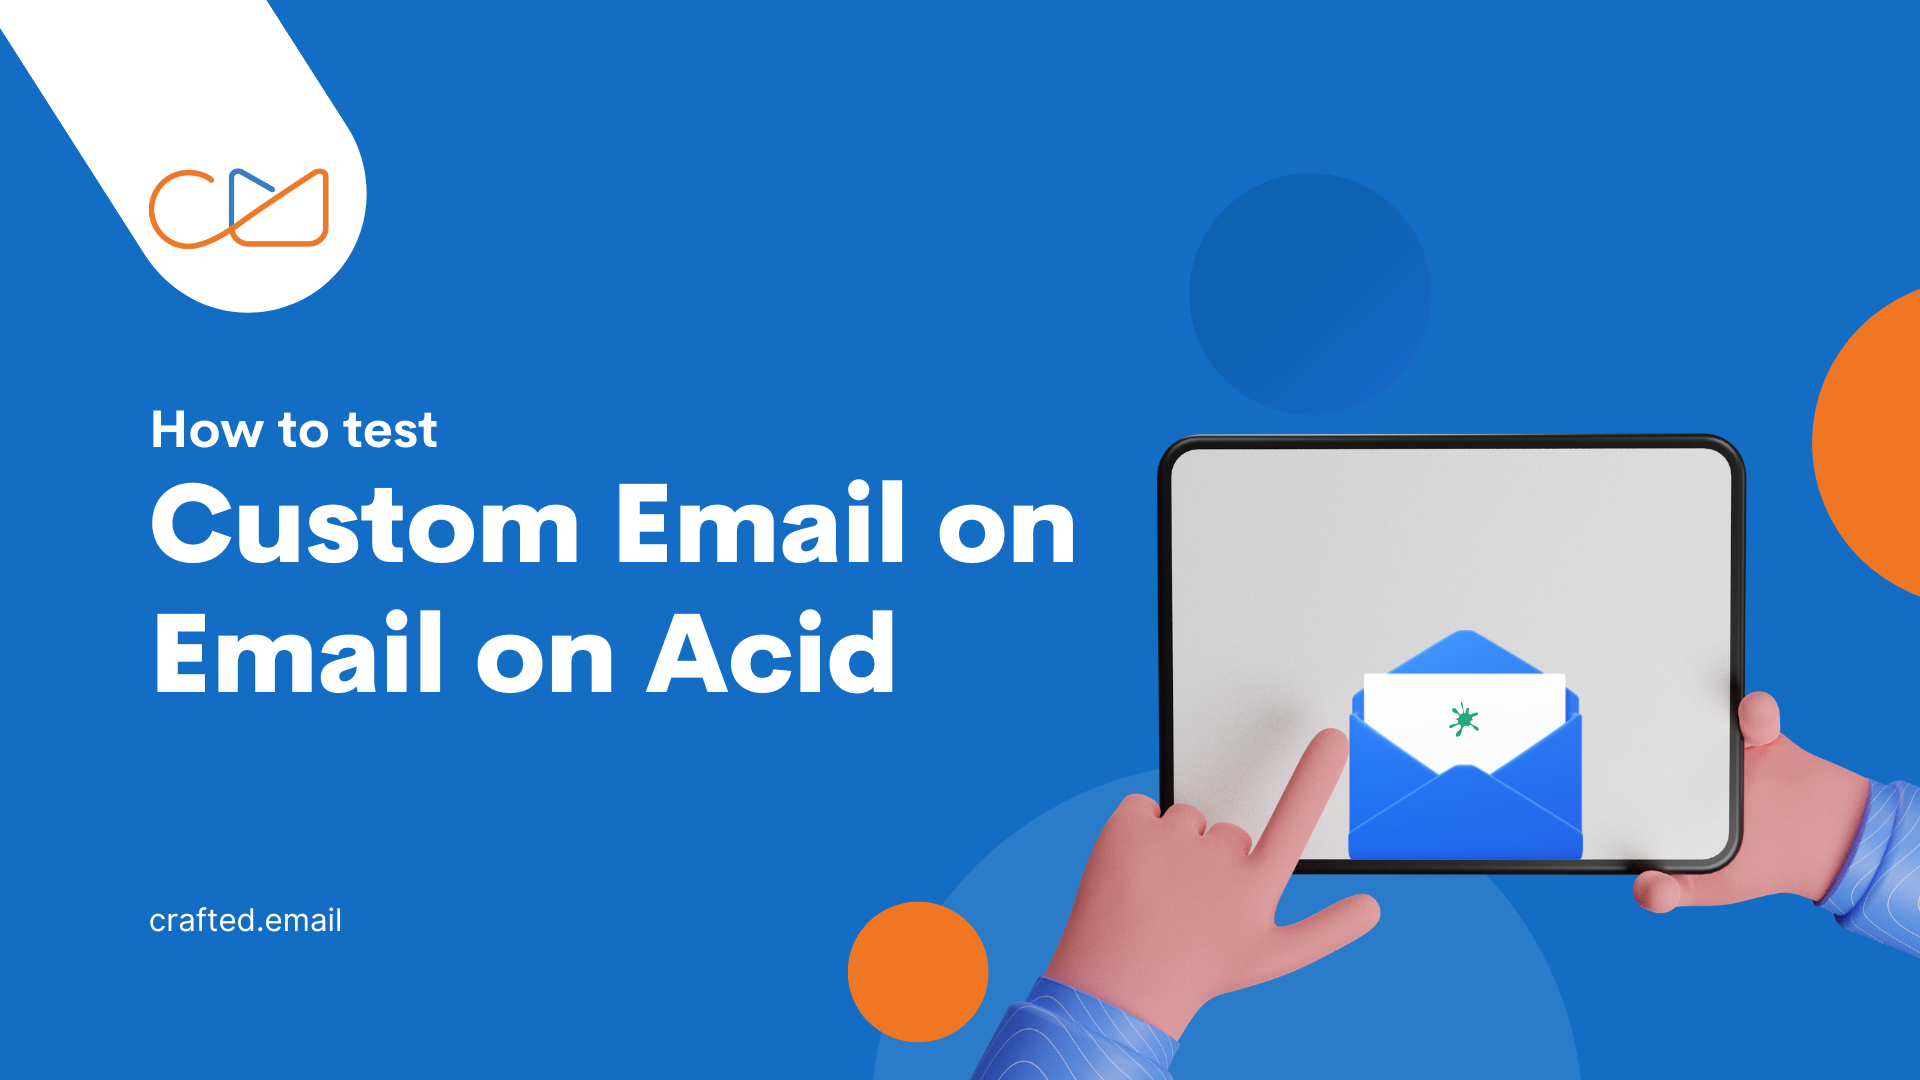 Email testing can be tricky but it’s the first step to a successful email campaign. It’s important to get it right. You also need email testing tools to ensure your email is presented in the right way. Read on to know how to test custom email on email on acid!